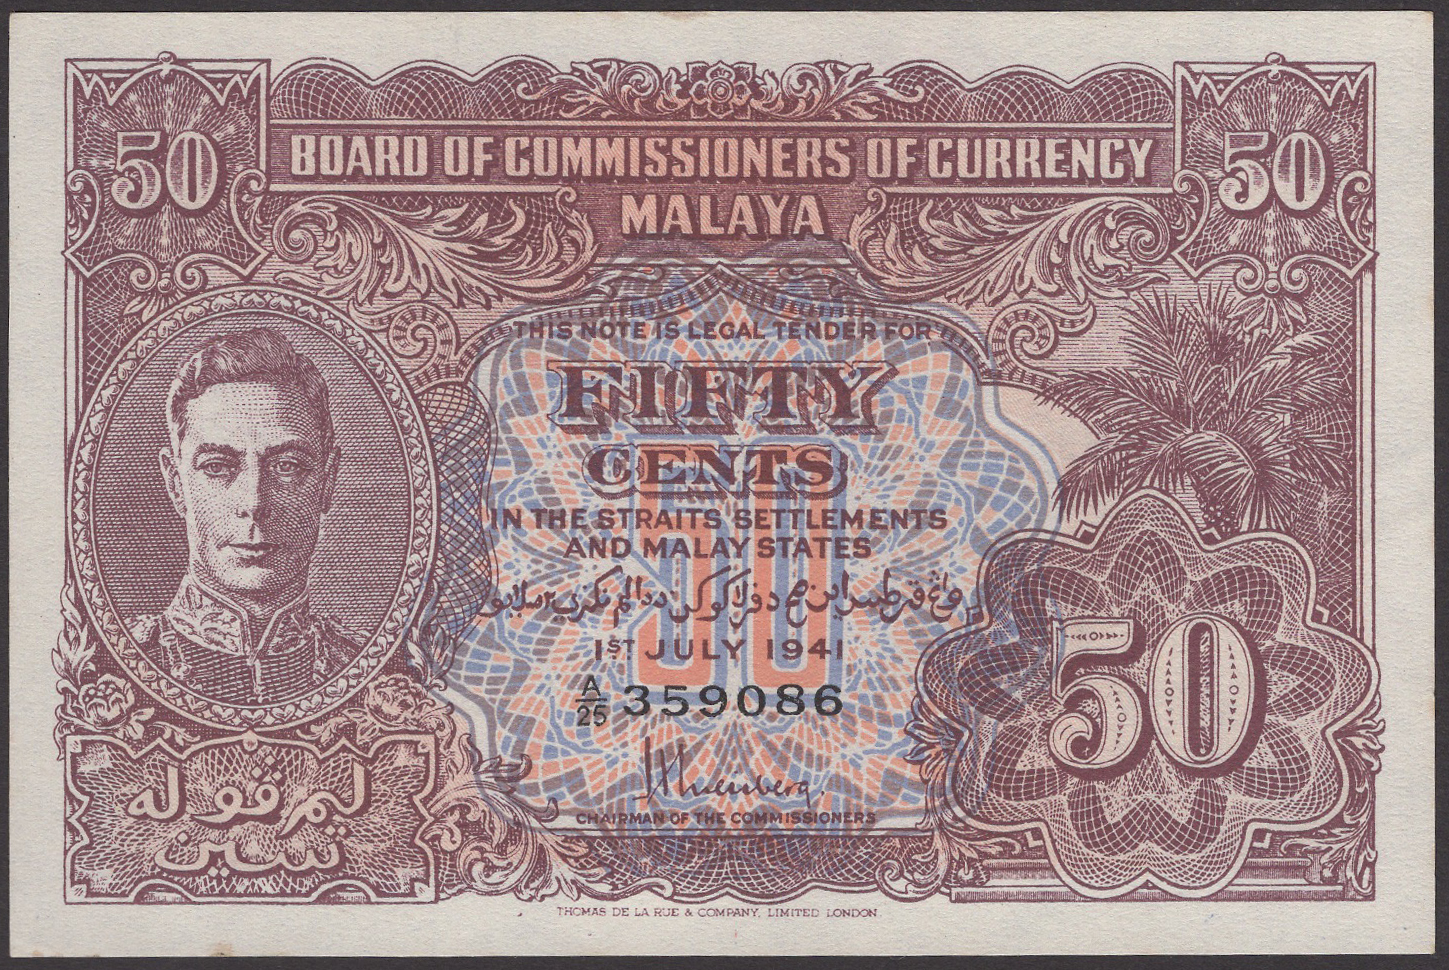 Board of Commissioners of Currency Malaya, 50 Cents, 1 July 1941, serial number A/25...